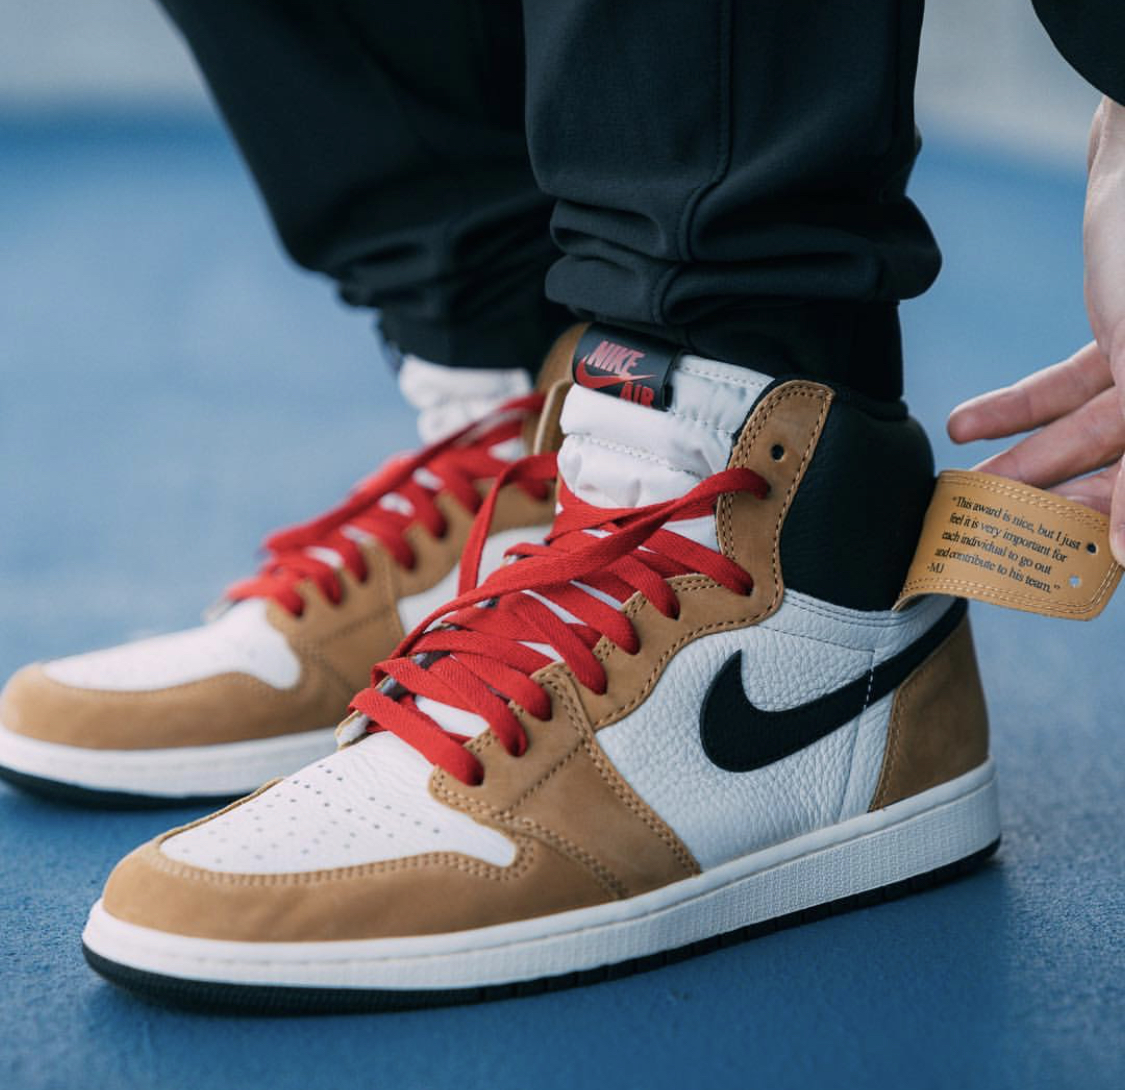 Now Available: Air Jordan 1 High OG "Rookie the Year" Sneaker Shouts